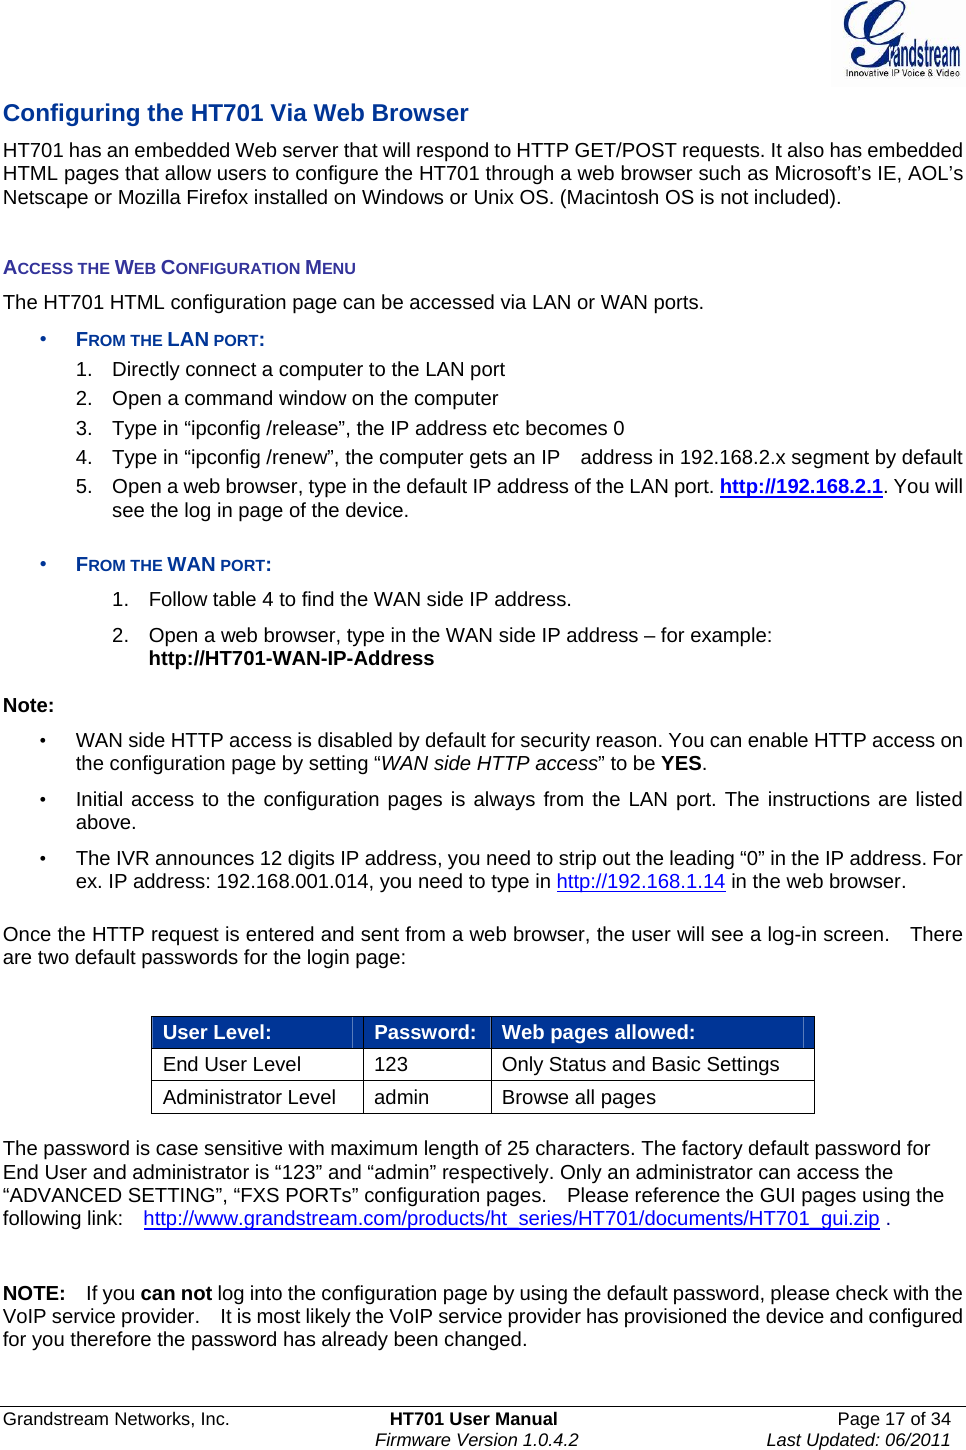  Grandstream Networks, Inc.  HT701 User Manual  Page 17 of 34     Firmware Version 1.0.4.2  Last Updated: 06/2011  Configuring the HT701 Via Web Browser   HT701 has an embedded Web server that will respond to HTTP GET/POST requests. It also has embedded HTML pages that allow users to configure the HT701 through a web browser such as Microsoft’s IE, AOL’s Netscape or Mozilla Firefox installed on Windows or Unix OS. (Macintosh OS is not included).   ACCESS THE WEB CONFIGURATION MENU The HT701 HTML configuration page can be accessed via LAN or WAN ports. • FROM THE LAN PORT: 1.  Directly connect a computer to the LAN port   2.  Open a command window on the computer 3.  Type in “ipconfig /release”, the IP address etc becomes 0 4.  Type in “ipconfig /renew”, the computer gets an IP    address in 192.168.2.x segment by default 5.  Open a web browser, type in the default IP address of the LAN port. http://192.168.2.1. You will see the log in page of the device.    • FROM THE WAN PORT: 1.  Follow table 4 to find the WAN side IP address. 2.  Open a web browser, type in the WAN side IP address – for example: http://HT701-WAN-IP-Address  Note:   •  WAN side HTTP access is disabled by default for security reason. You can enable HTTP access on the configuration page by setting “WAN side HTTP access” to be YES.  •  Initial access to the configuration pages is always from the LAN port. The instructions are listed above. •  The IVR announces 12 digits IP address, you need to strip out the leading “0” in the IP address. For ex. IP address: 192.168.001.014, you need to type in http://192.168.1.14 in the web browser.    Once the HTTP request is entered and sent from a web browser, the user will see a log-in screen.    There are two default passwords for the login page:      User Level:  Password: Web pages allowed: End User Level  123  Only Status and Basic Settings Administrator Level  admin  Browse all pages    The password is case sensitive with maximum length of 25 characters. The factory default password for End User and administrator is “123” and “admin” respectively. Only an administrator can access the “ADVANCED SETTING”, “FXS PORTs” configuration pages.    Please reference the GUI pages using the following link:    http://www.grandstream.com/products/ht_series/HT701/documents/HT701_gui.zip .   NOTE:   If you can not log into the configuration page by using the default password, please check with the VoIP service provider.    It is most likely the VoIP service provider has provisioned the device and configured for you therefore the password has already been changed.  